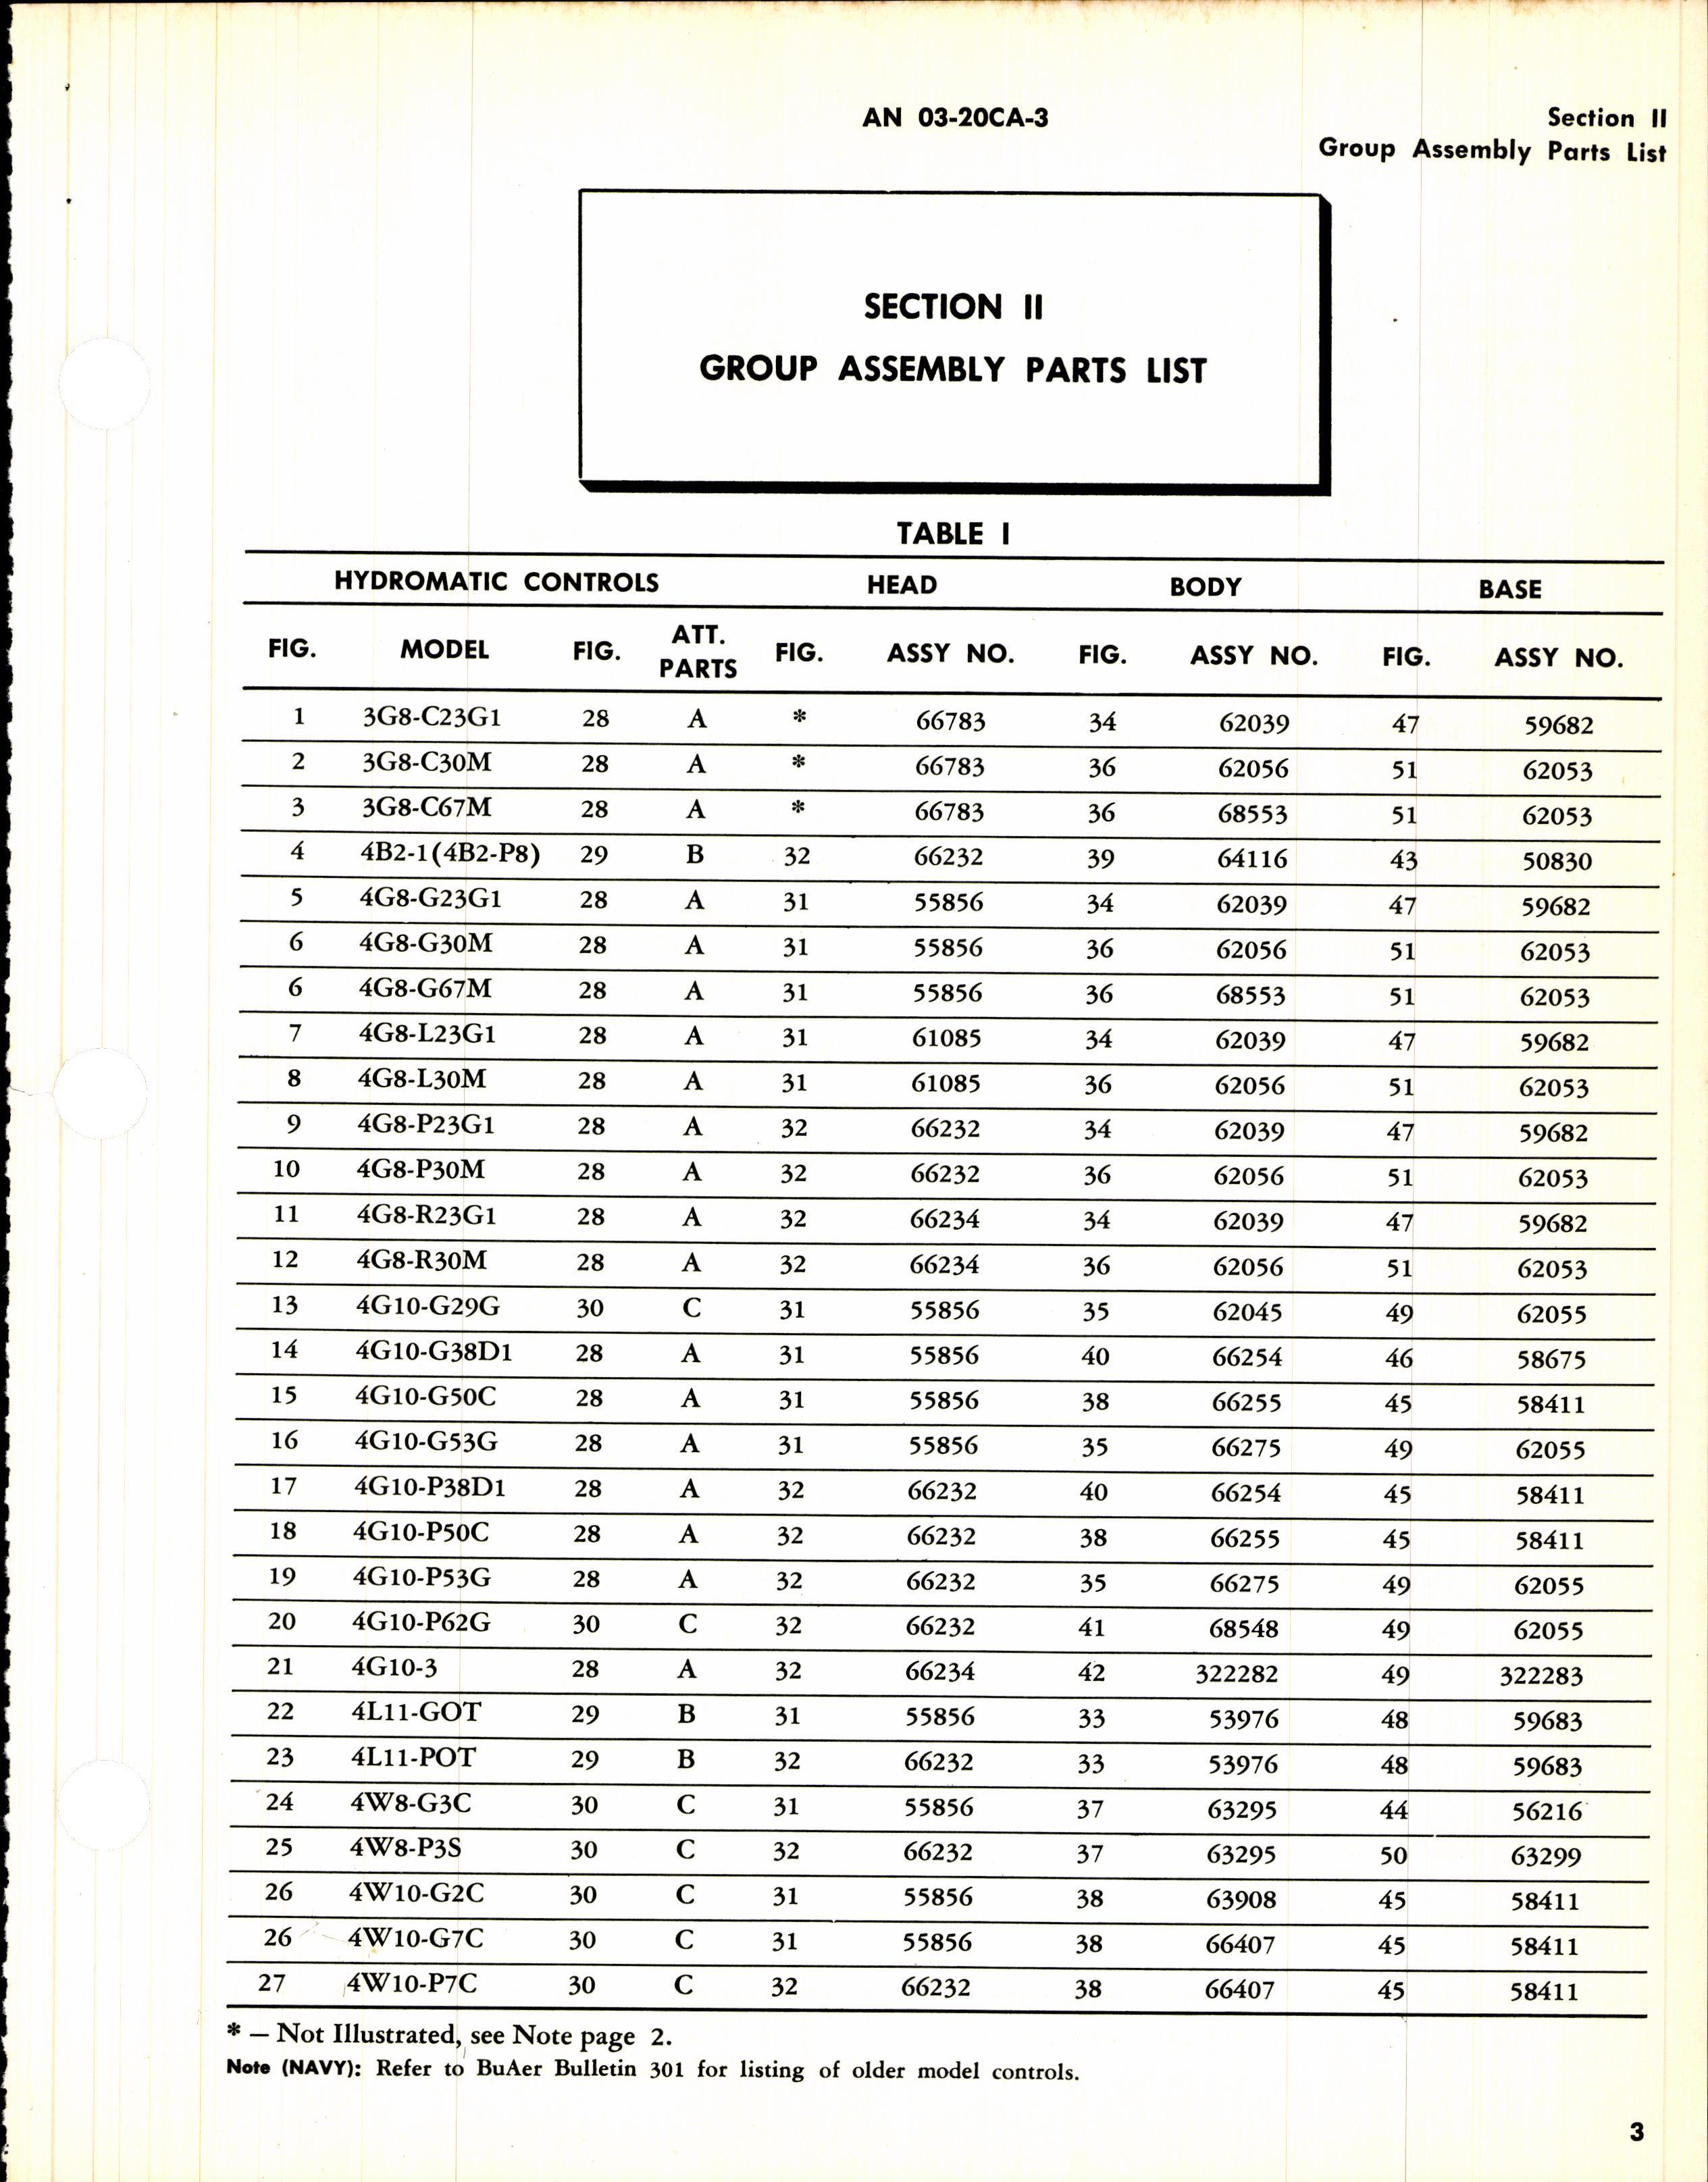 Sample page 7 from AirCorps Library document: Illustrated Parts Breakdown for Single-Acting Constant Speed Control Assemblies for Hydromatic Propellers